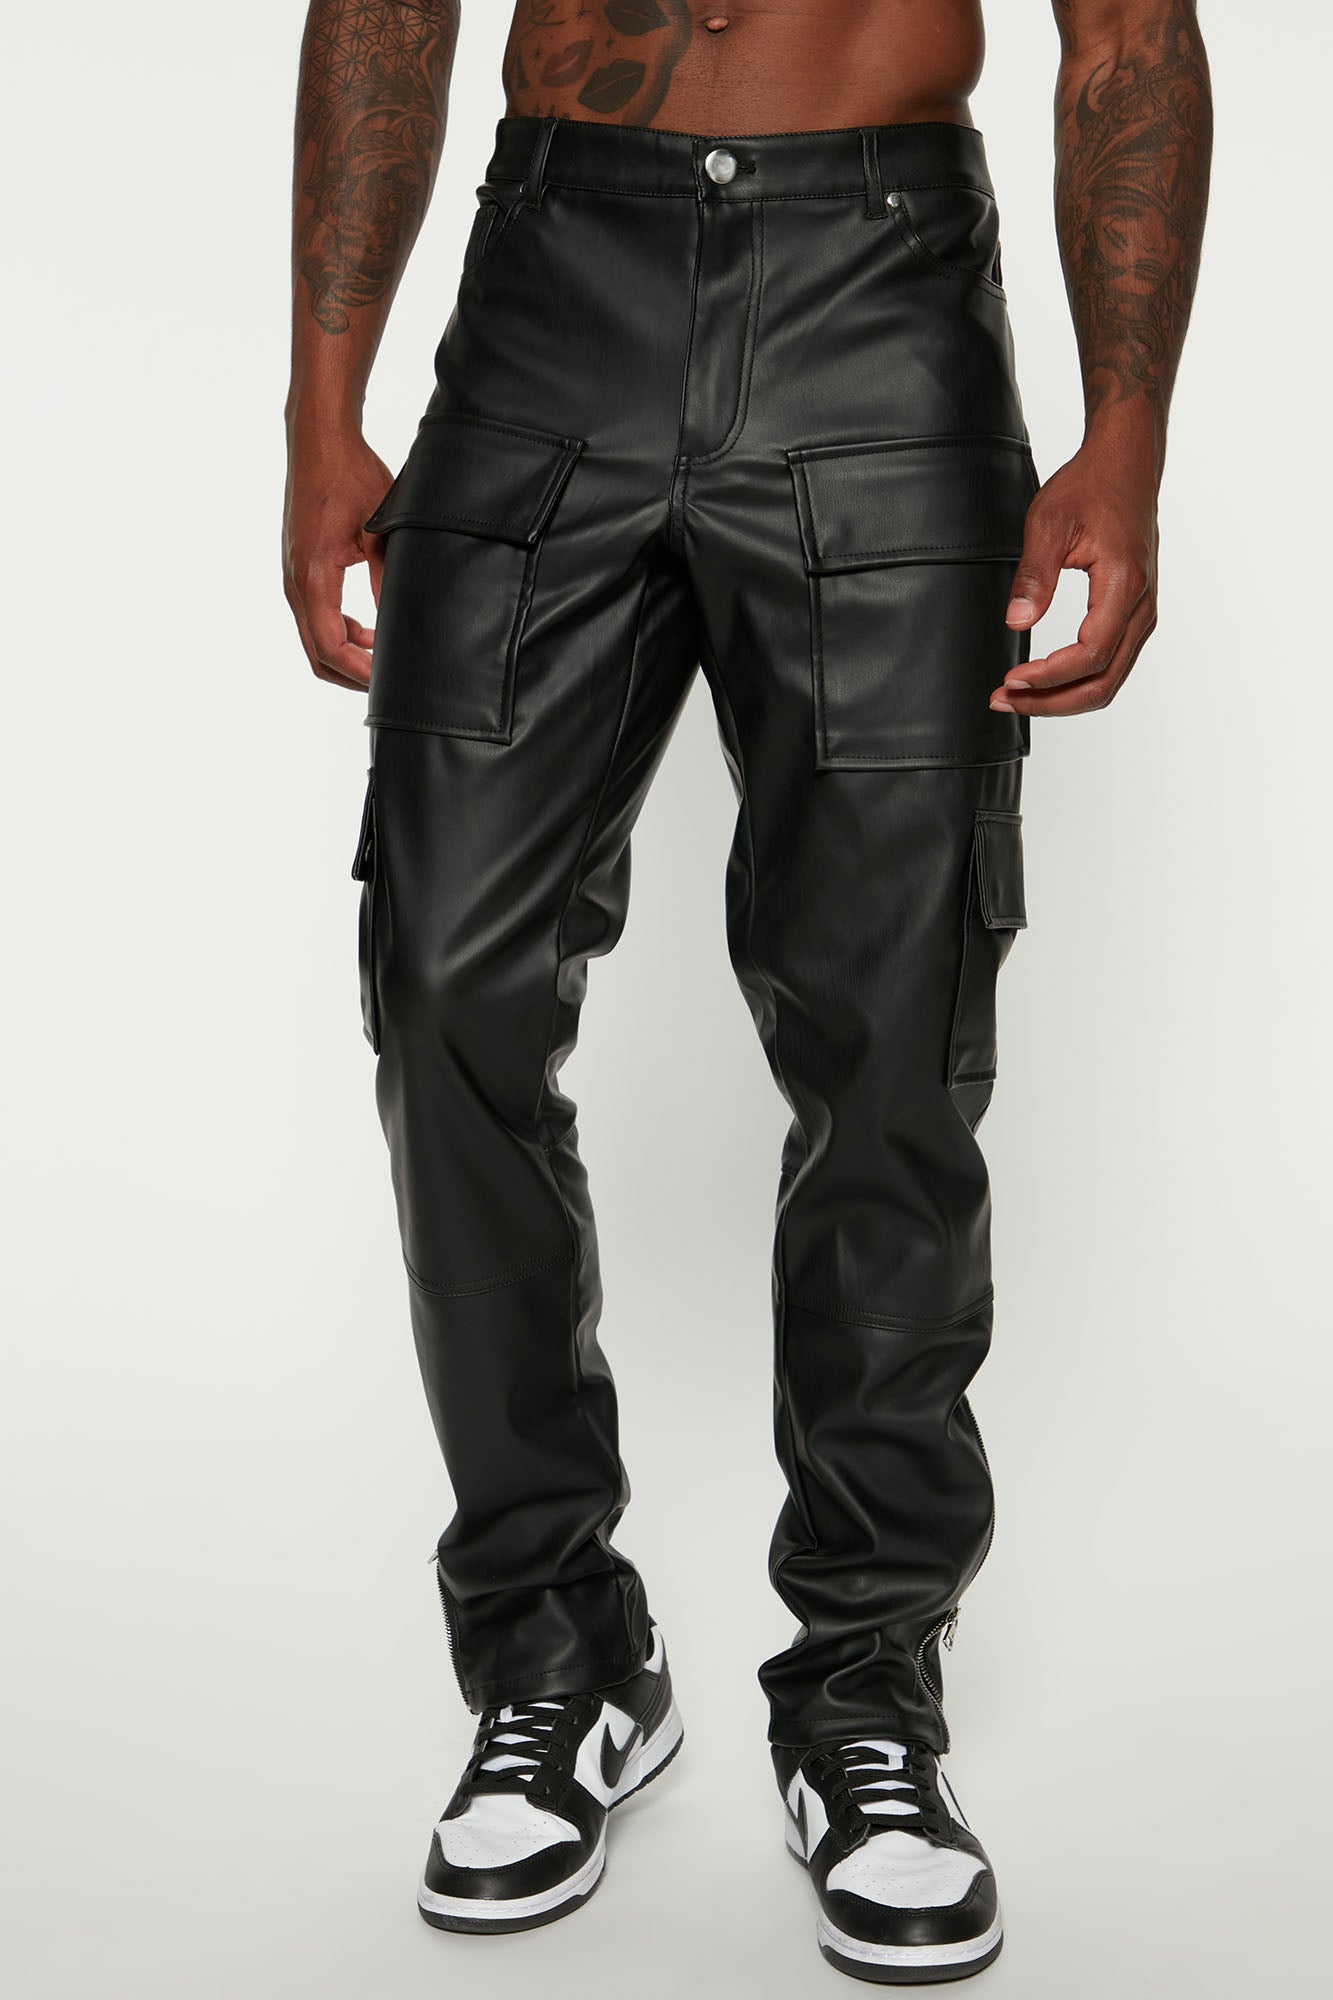 Genuine Black Leather Biker Pants With Cargo Pockets Trousers – Moven Era